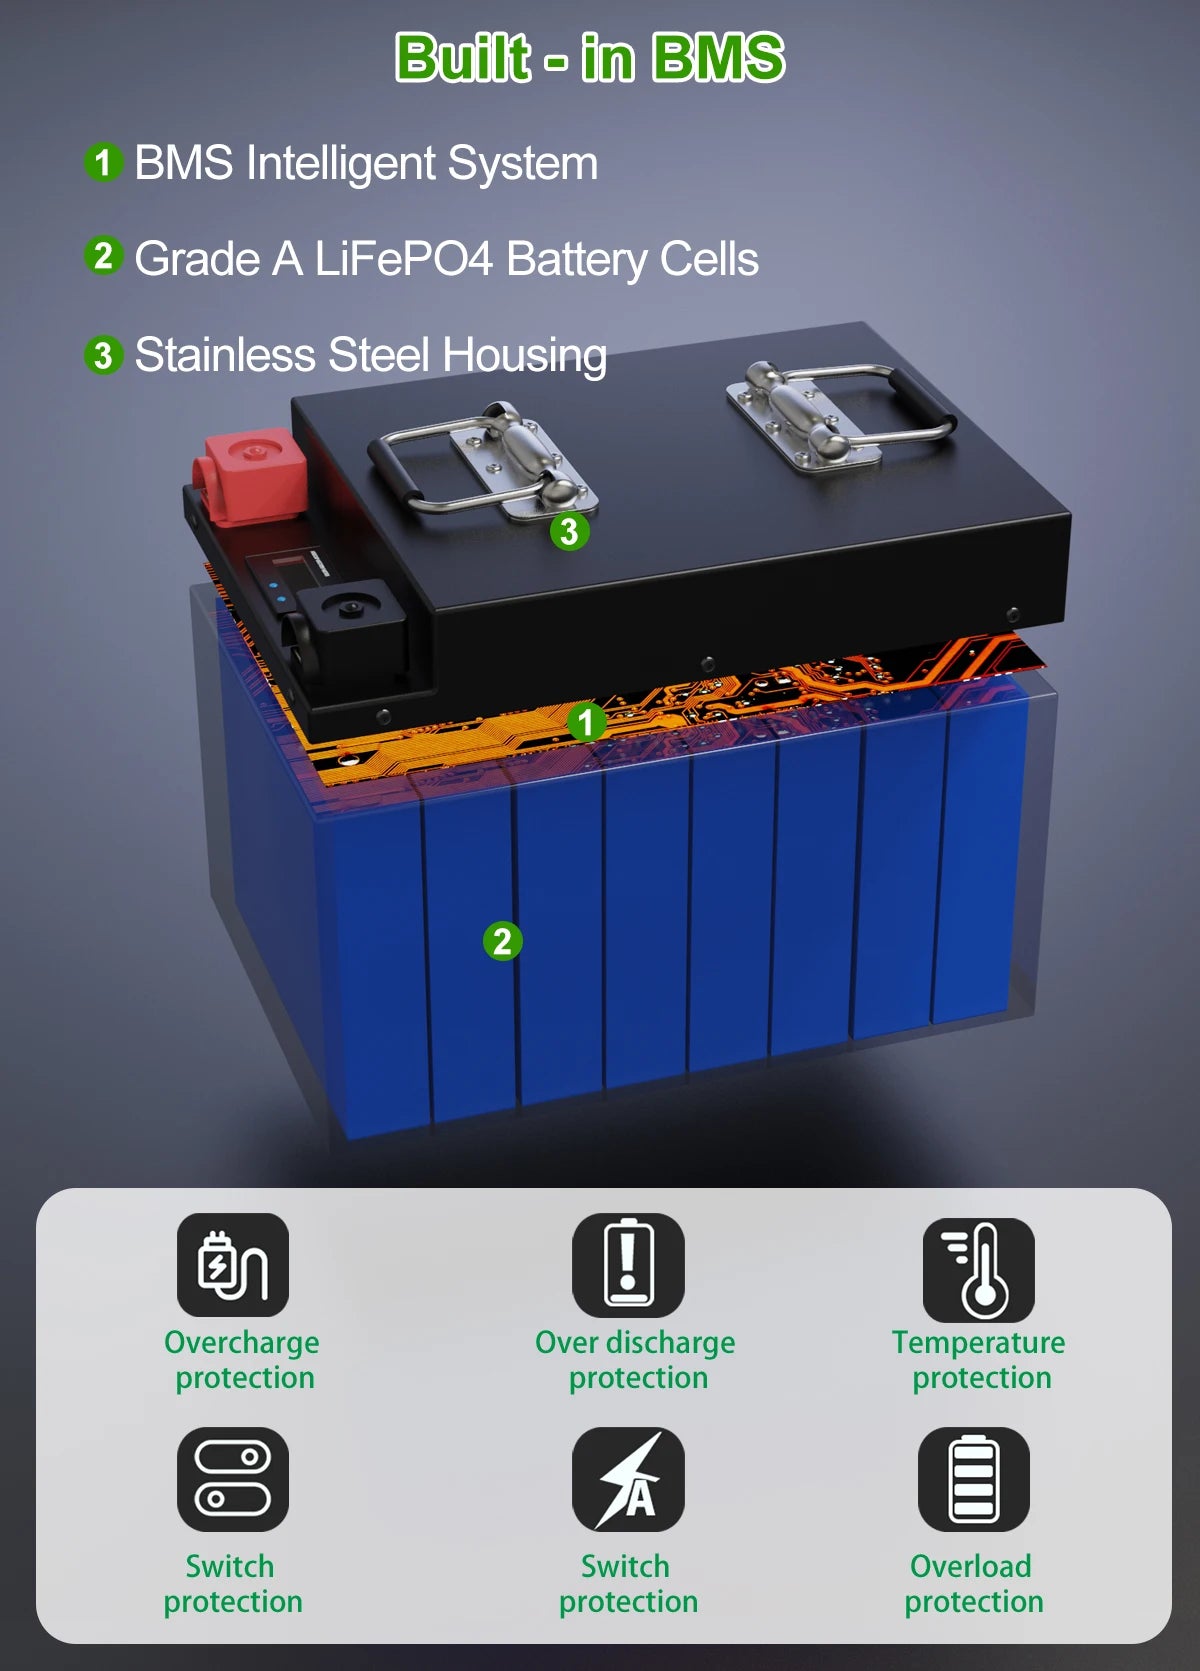 24V 140Ah 100Ah LiFePO4 Battery, Reliable LiFePO4 battery pack with intelligent BMS for safe and efficient performance.